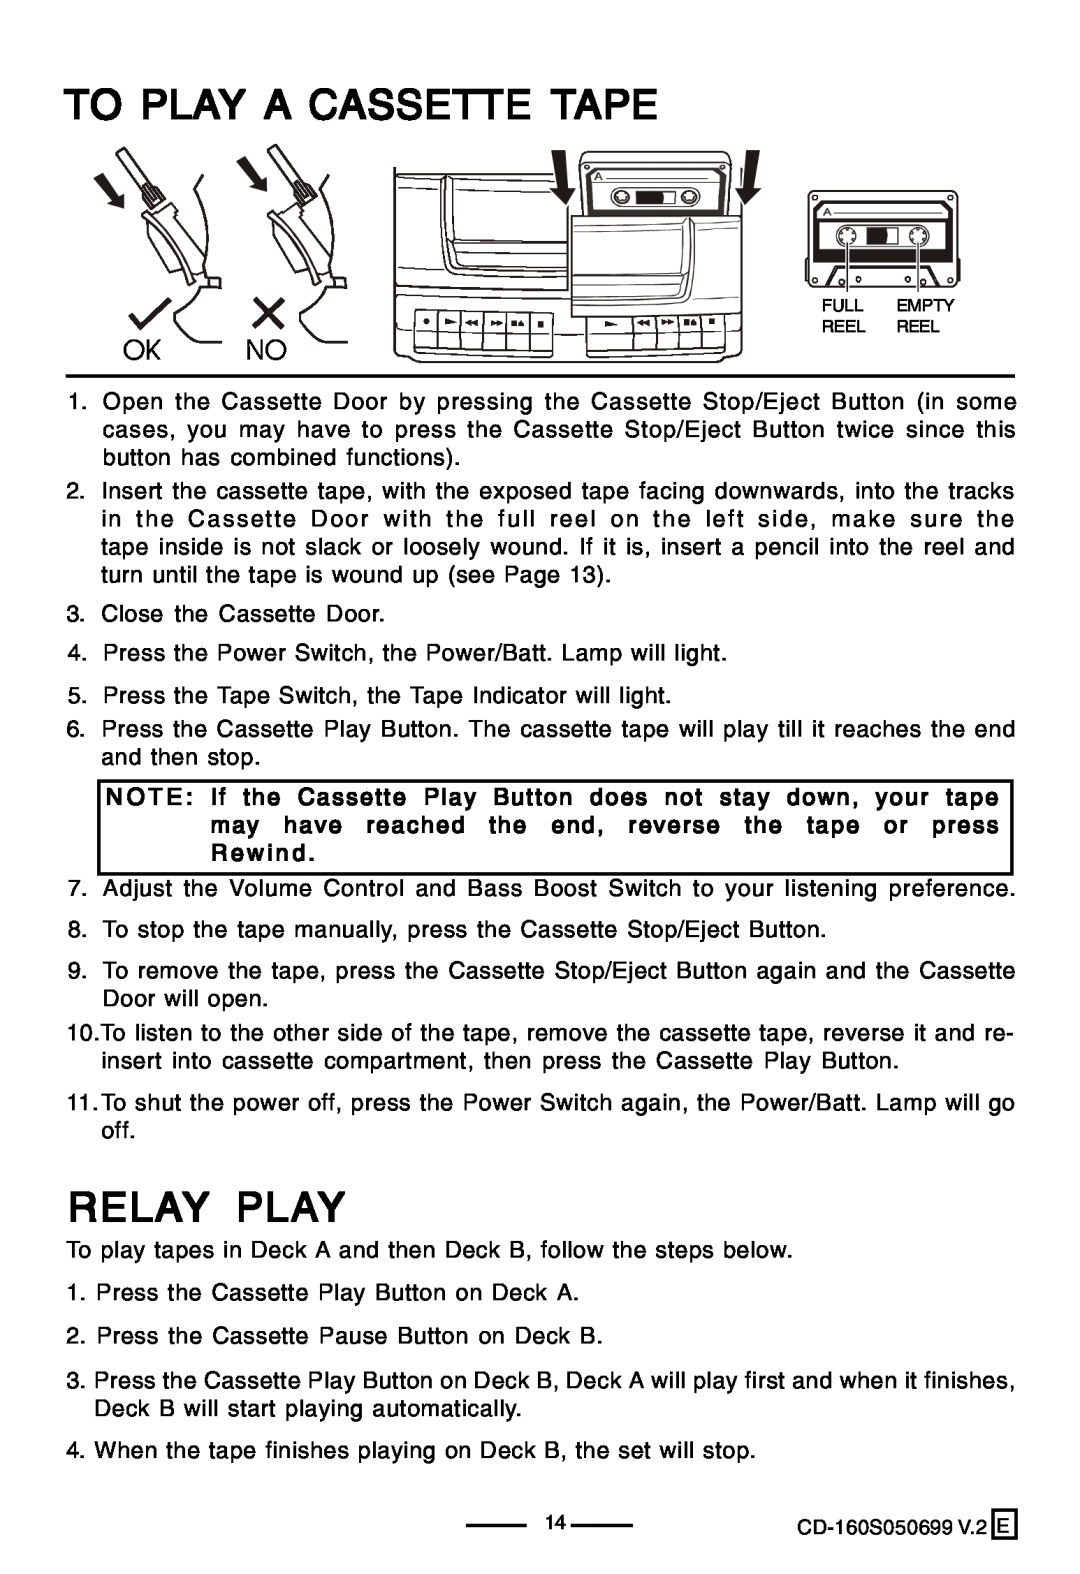 Lenoxx Electronics CD-160 manual To Play A Cassette Tape, Relay Play, Ok No, your, tape, Rewind 